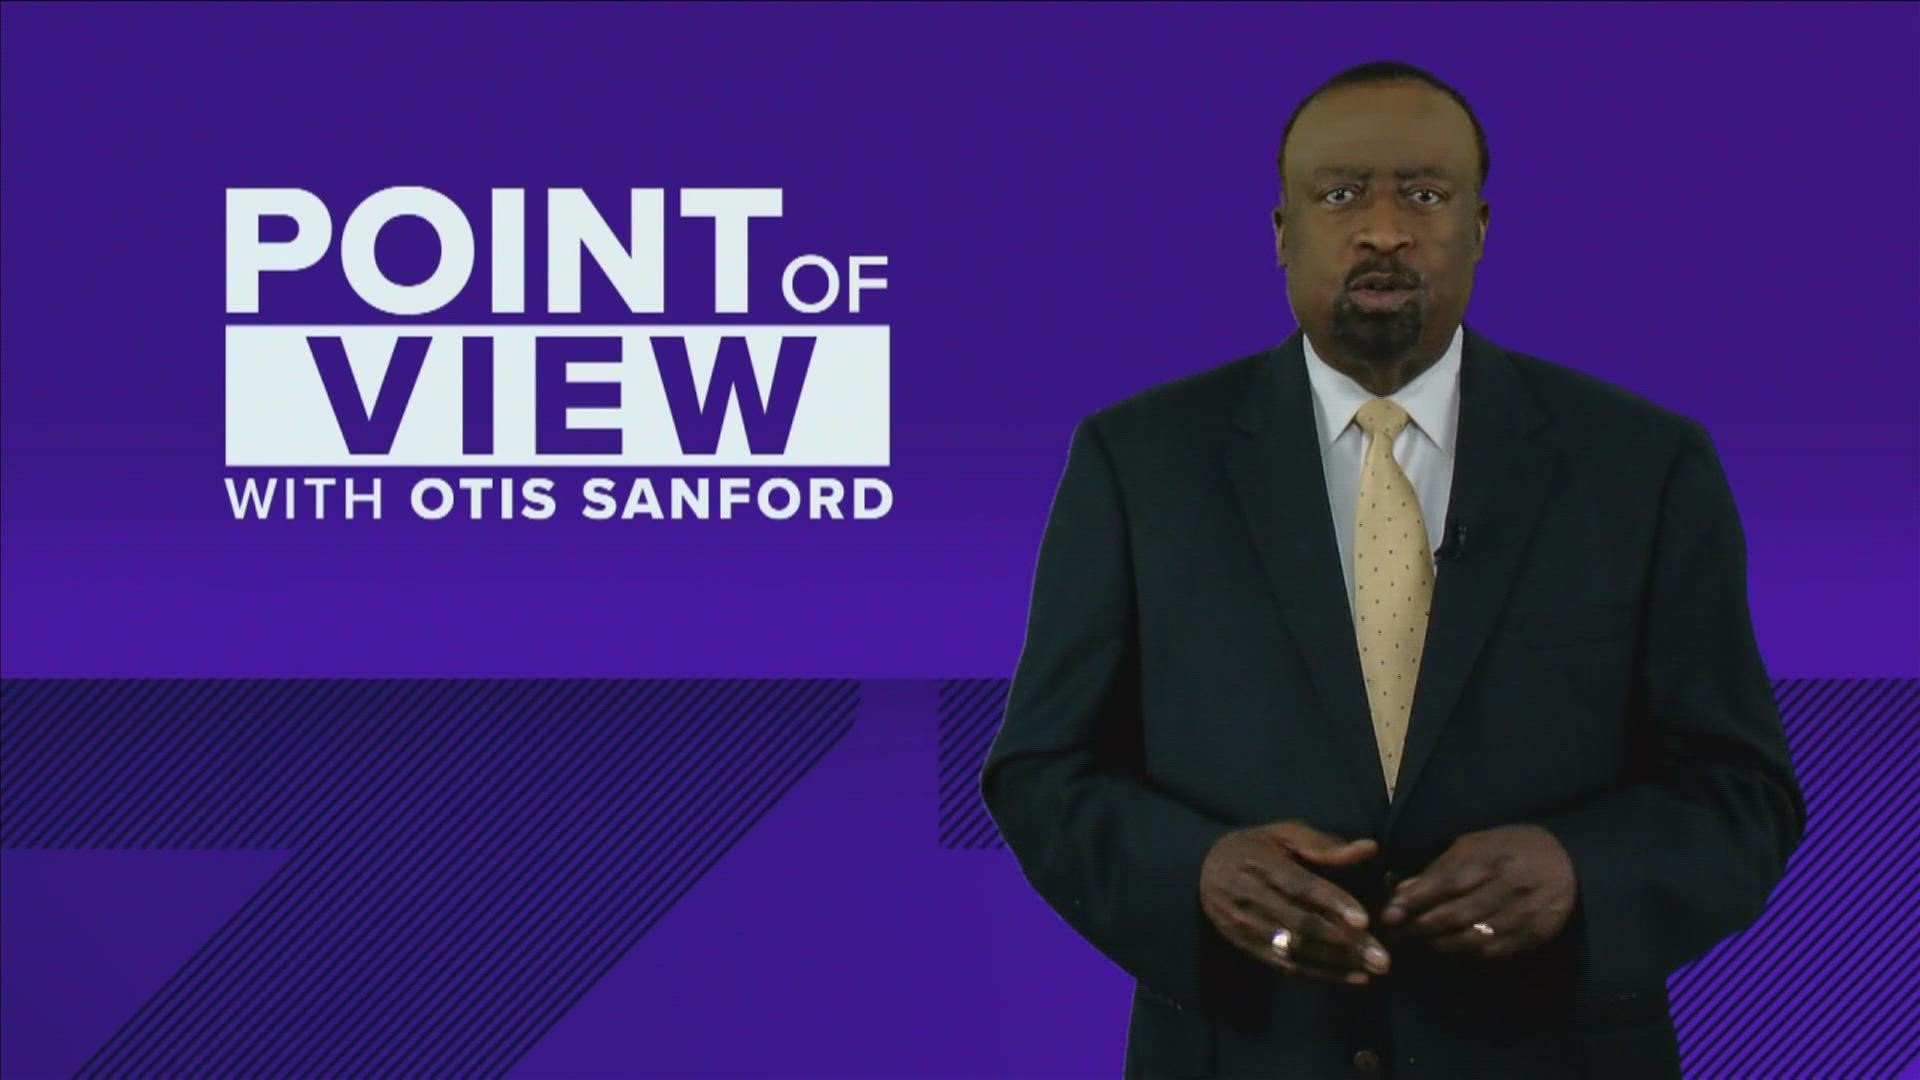 ABC24 political analyst and commentator Otis Sanford shared his point of view on the partial ceiling collapse at Cummings K-8.